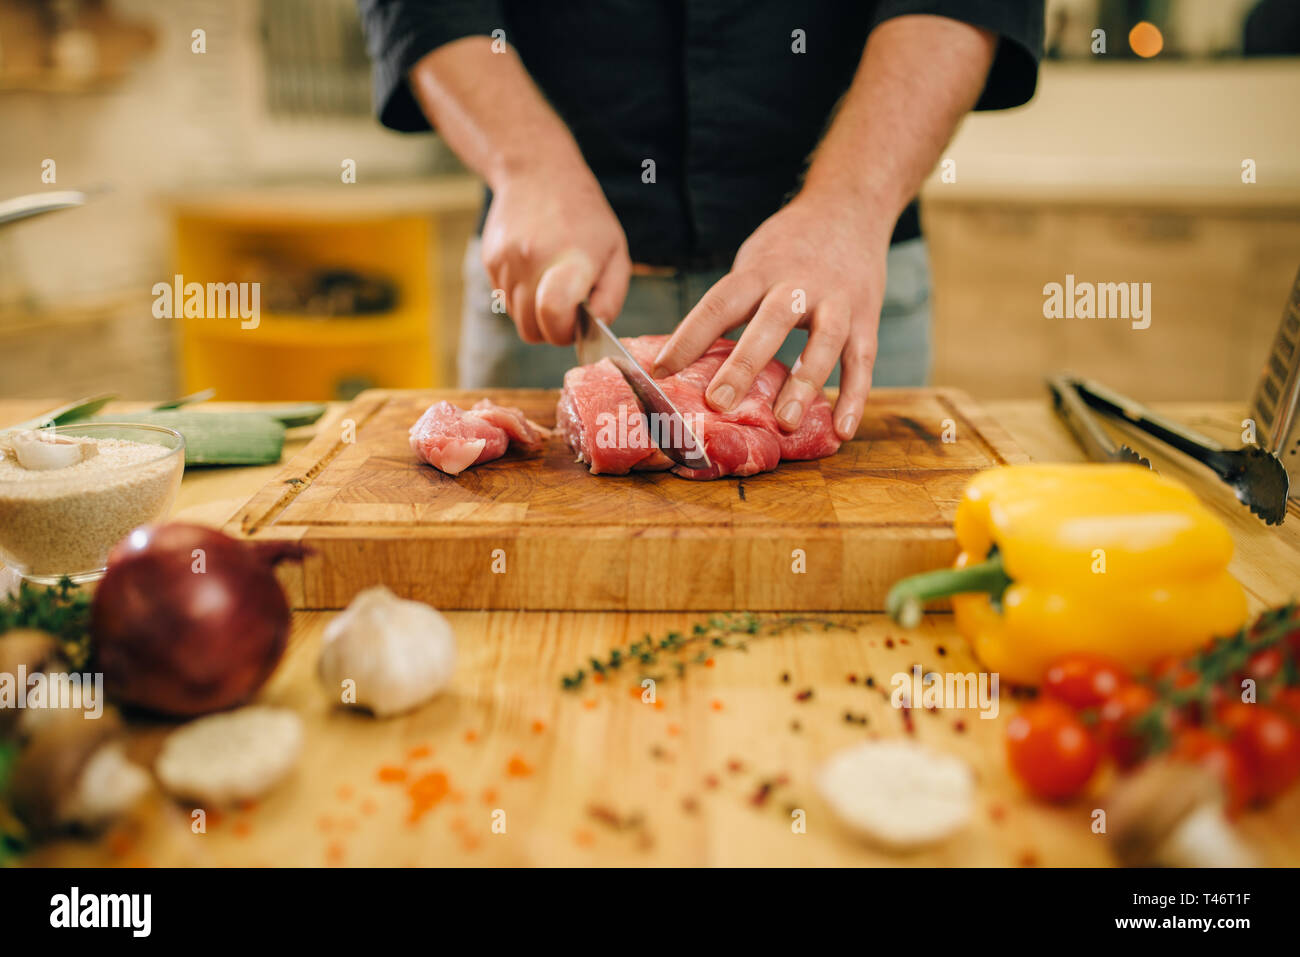 Male person with knife cuts raw meat into slices Stock Photo - Alamy